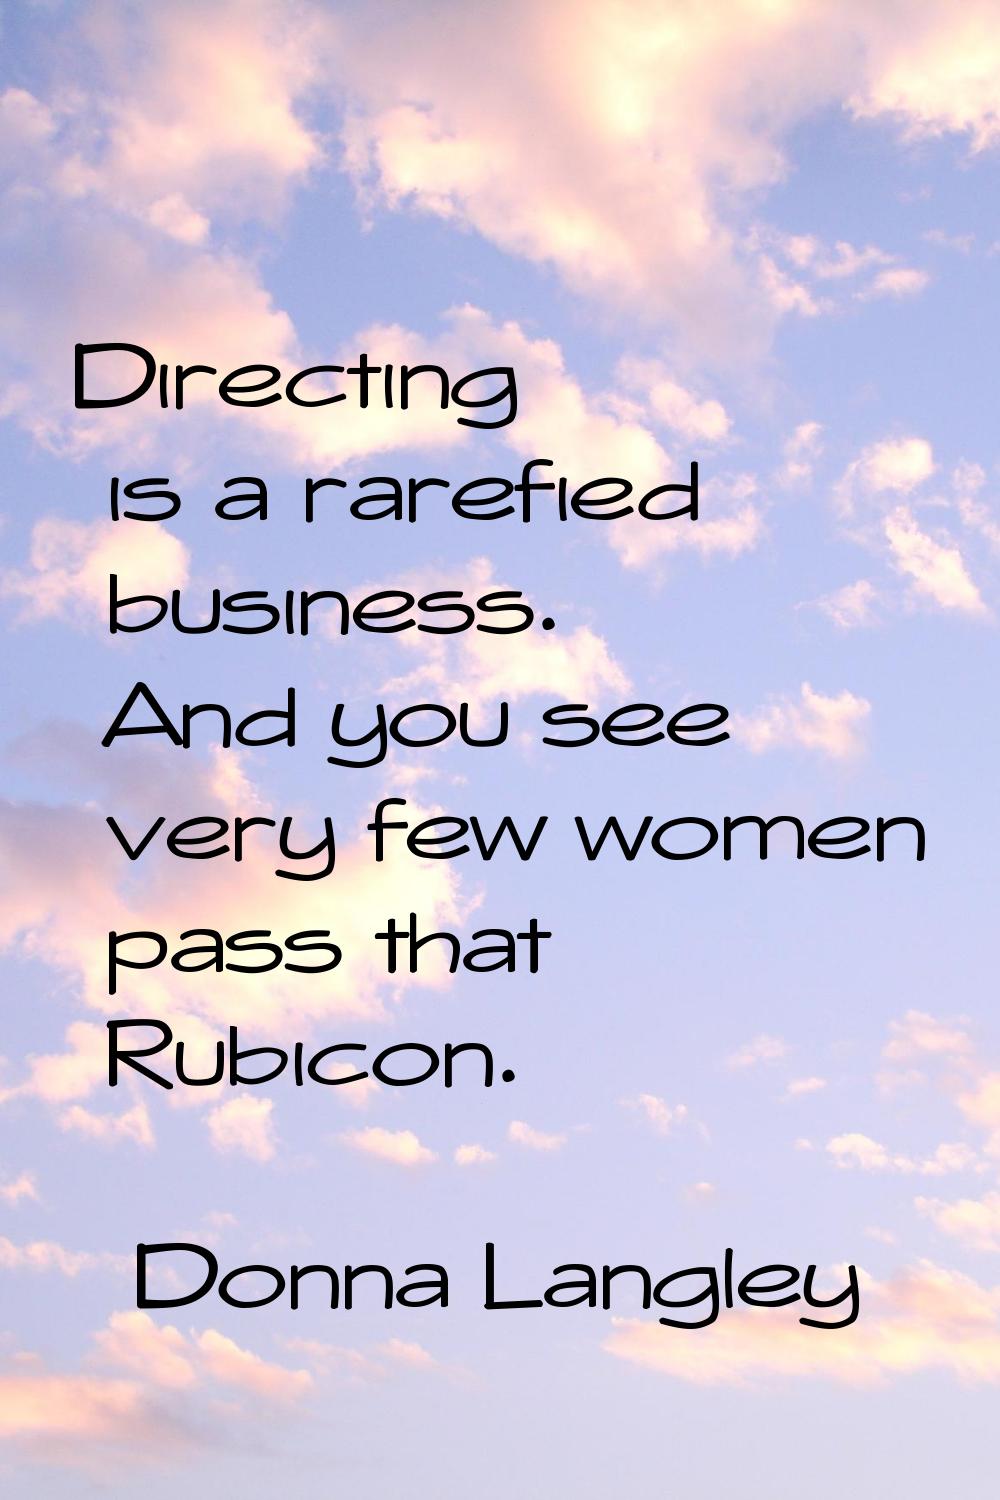 Directing is a rarefied business. And you see very few women pass that Rubicon.